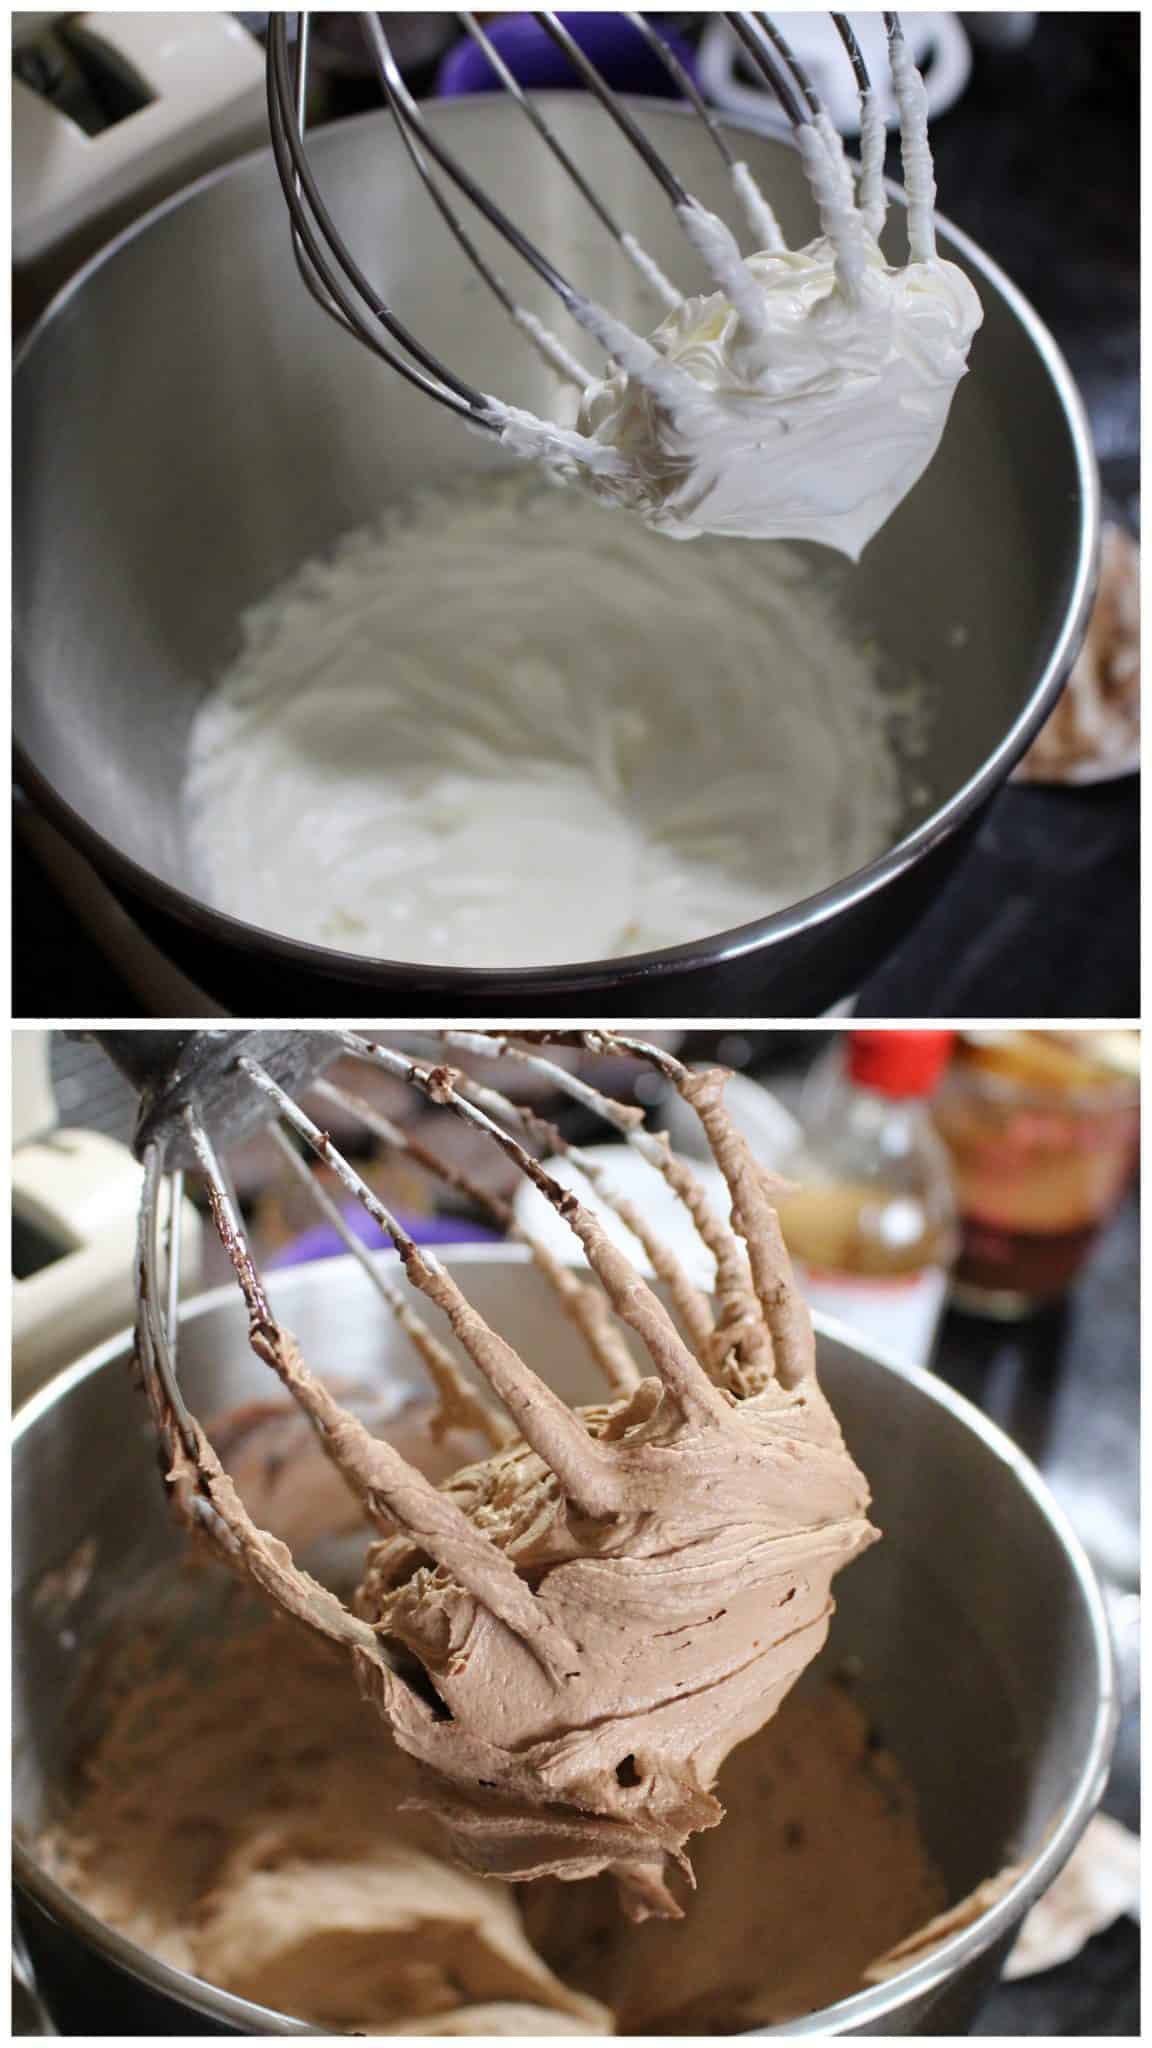 Making the Chocolate Buttercream Frosting